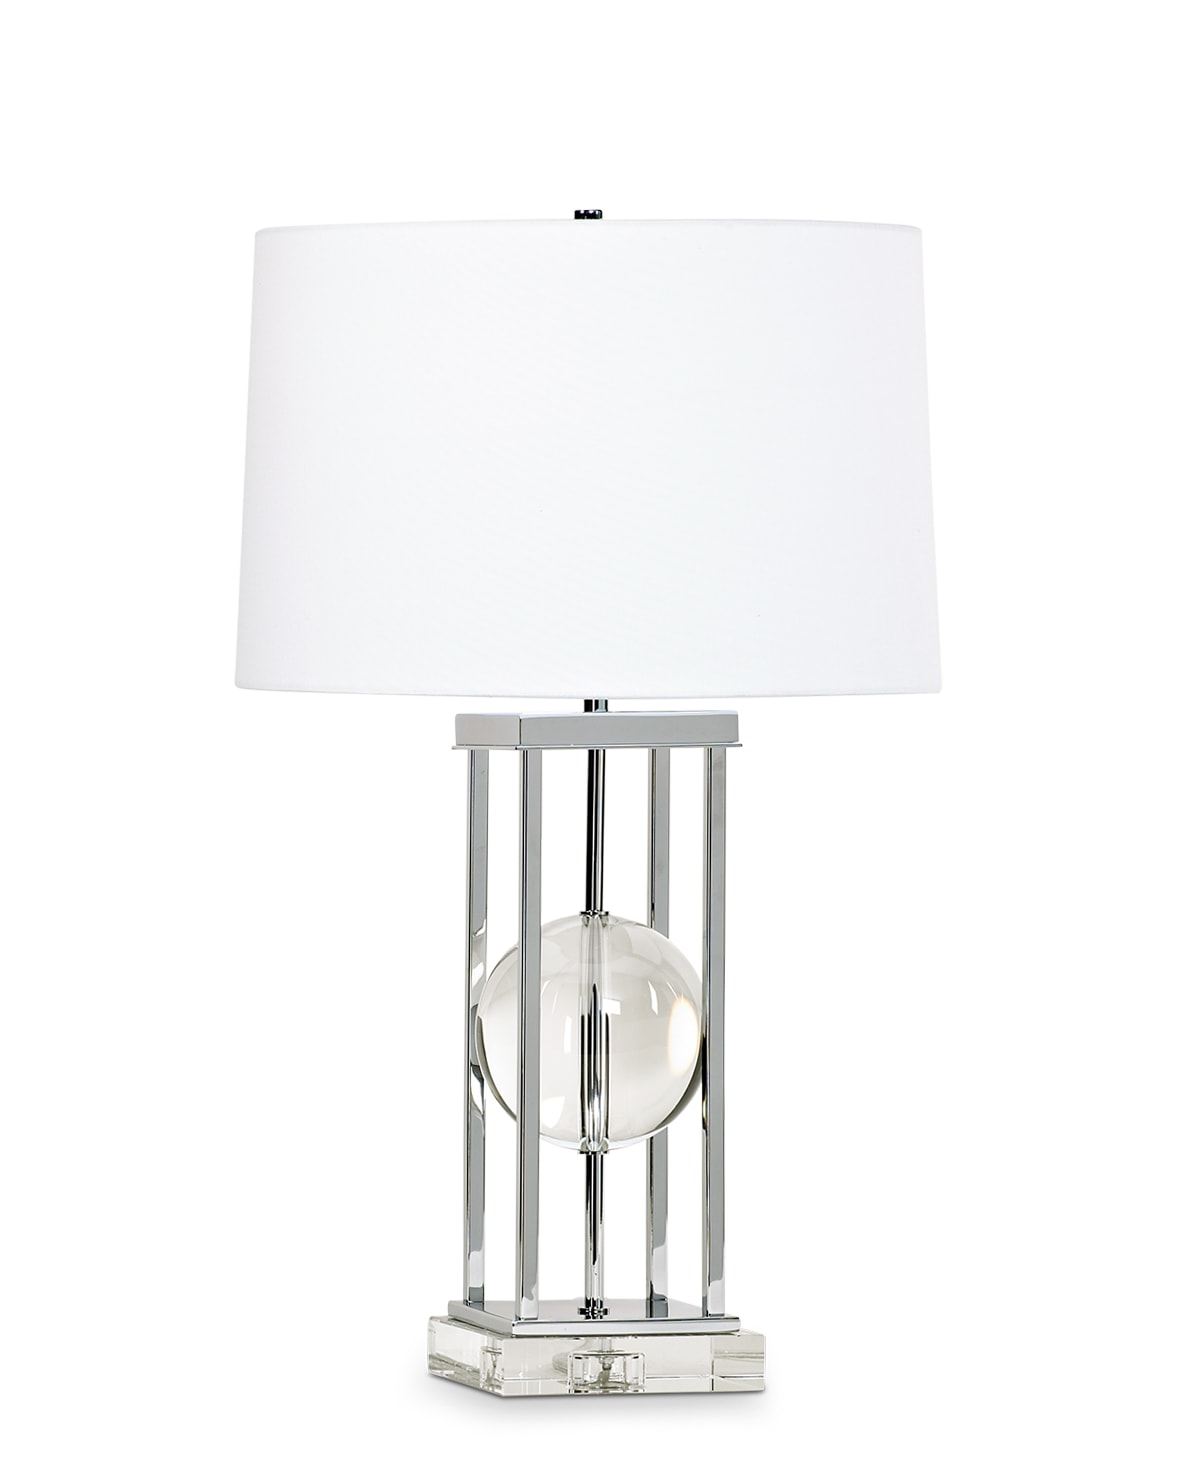 FlowDecor Locust Table Lamp in crystal and metal with chrome finish and white linen tapered drum shade (# 3700)